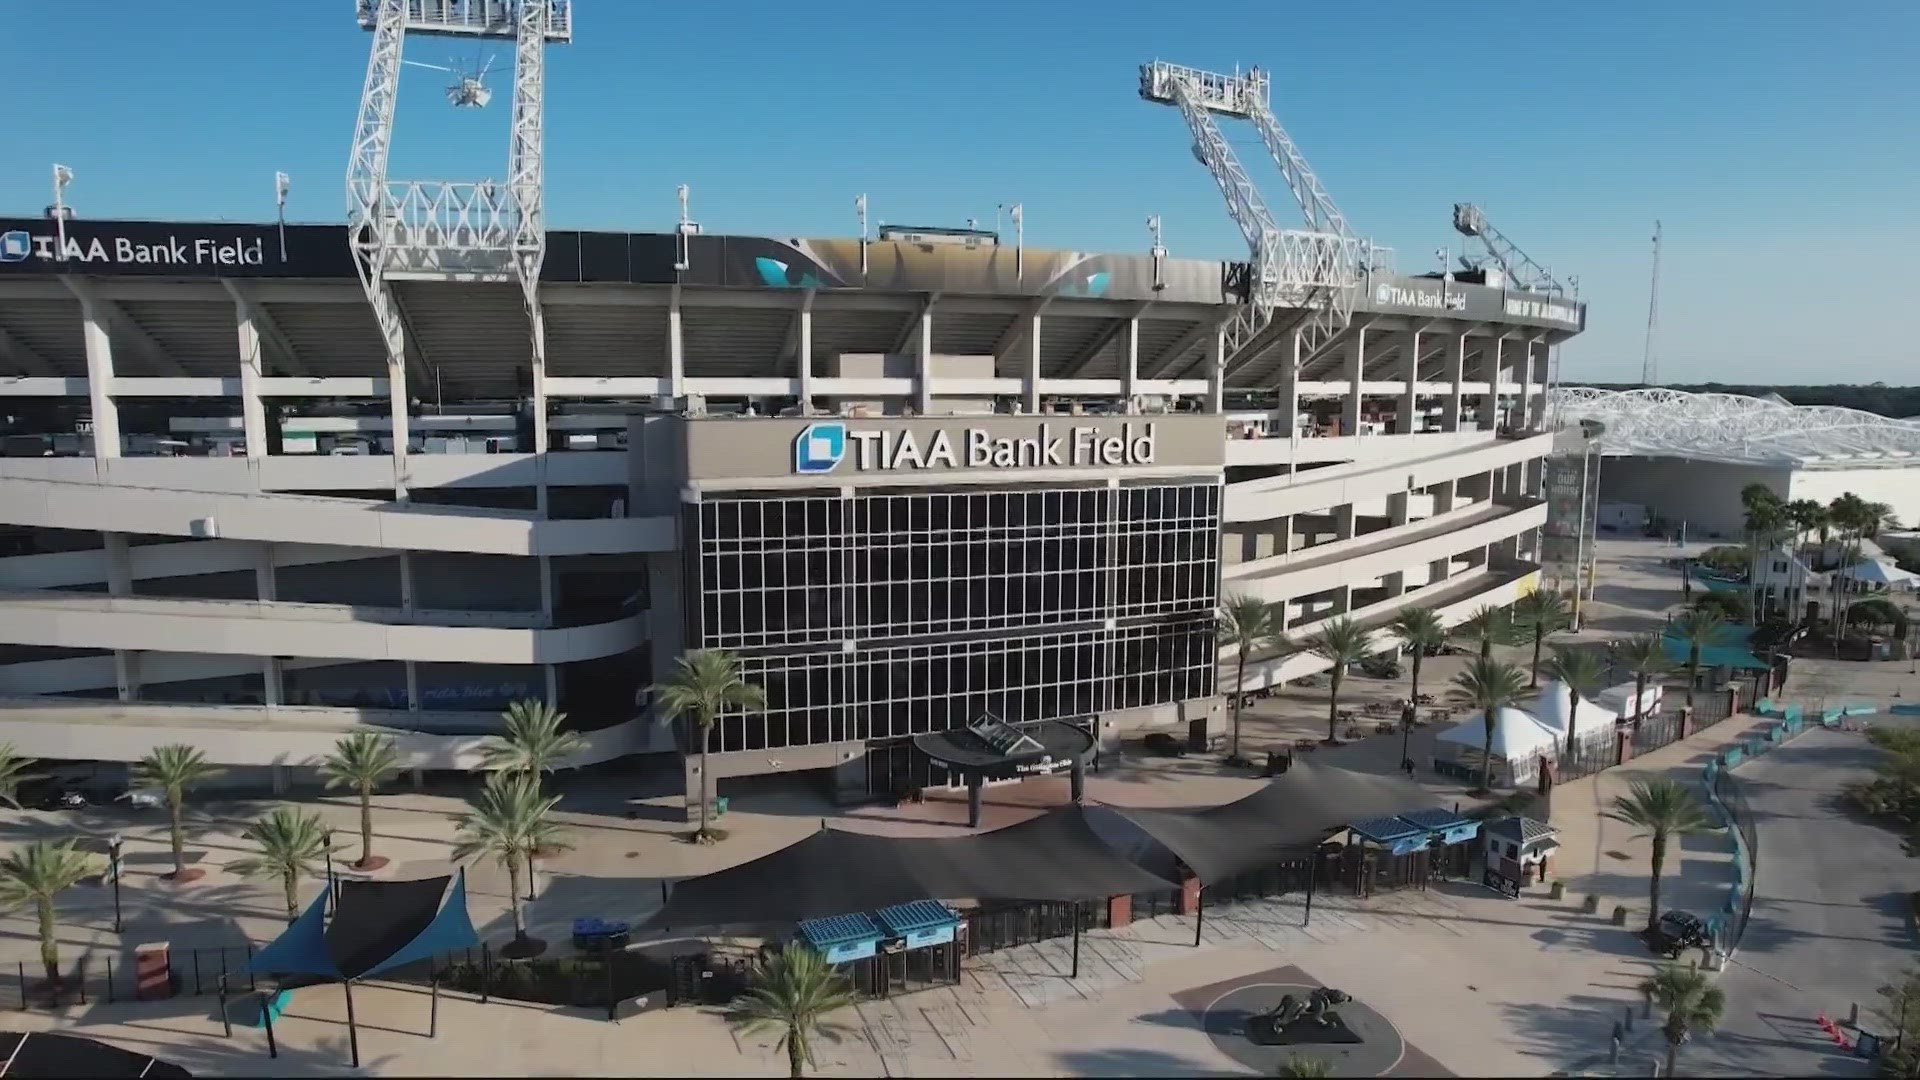 Jacksonville Mayor Curry said that ideally, renovation would take place over two years and only impact two football seasons.